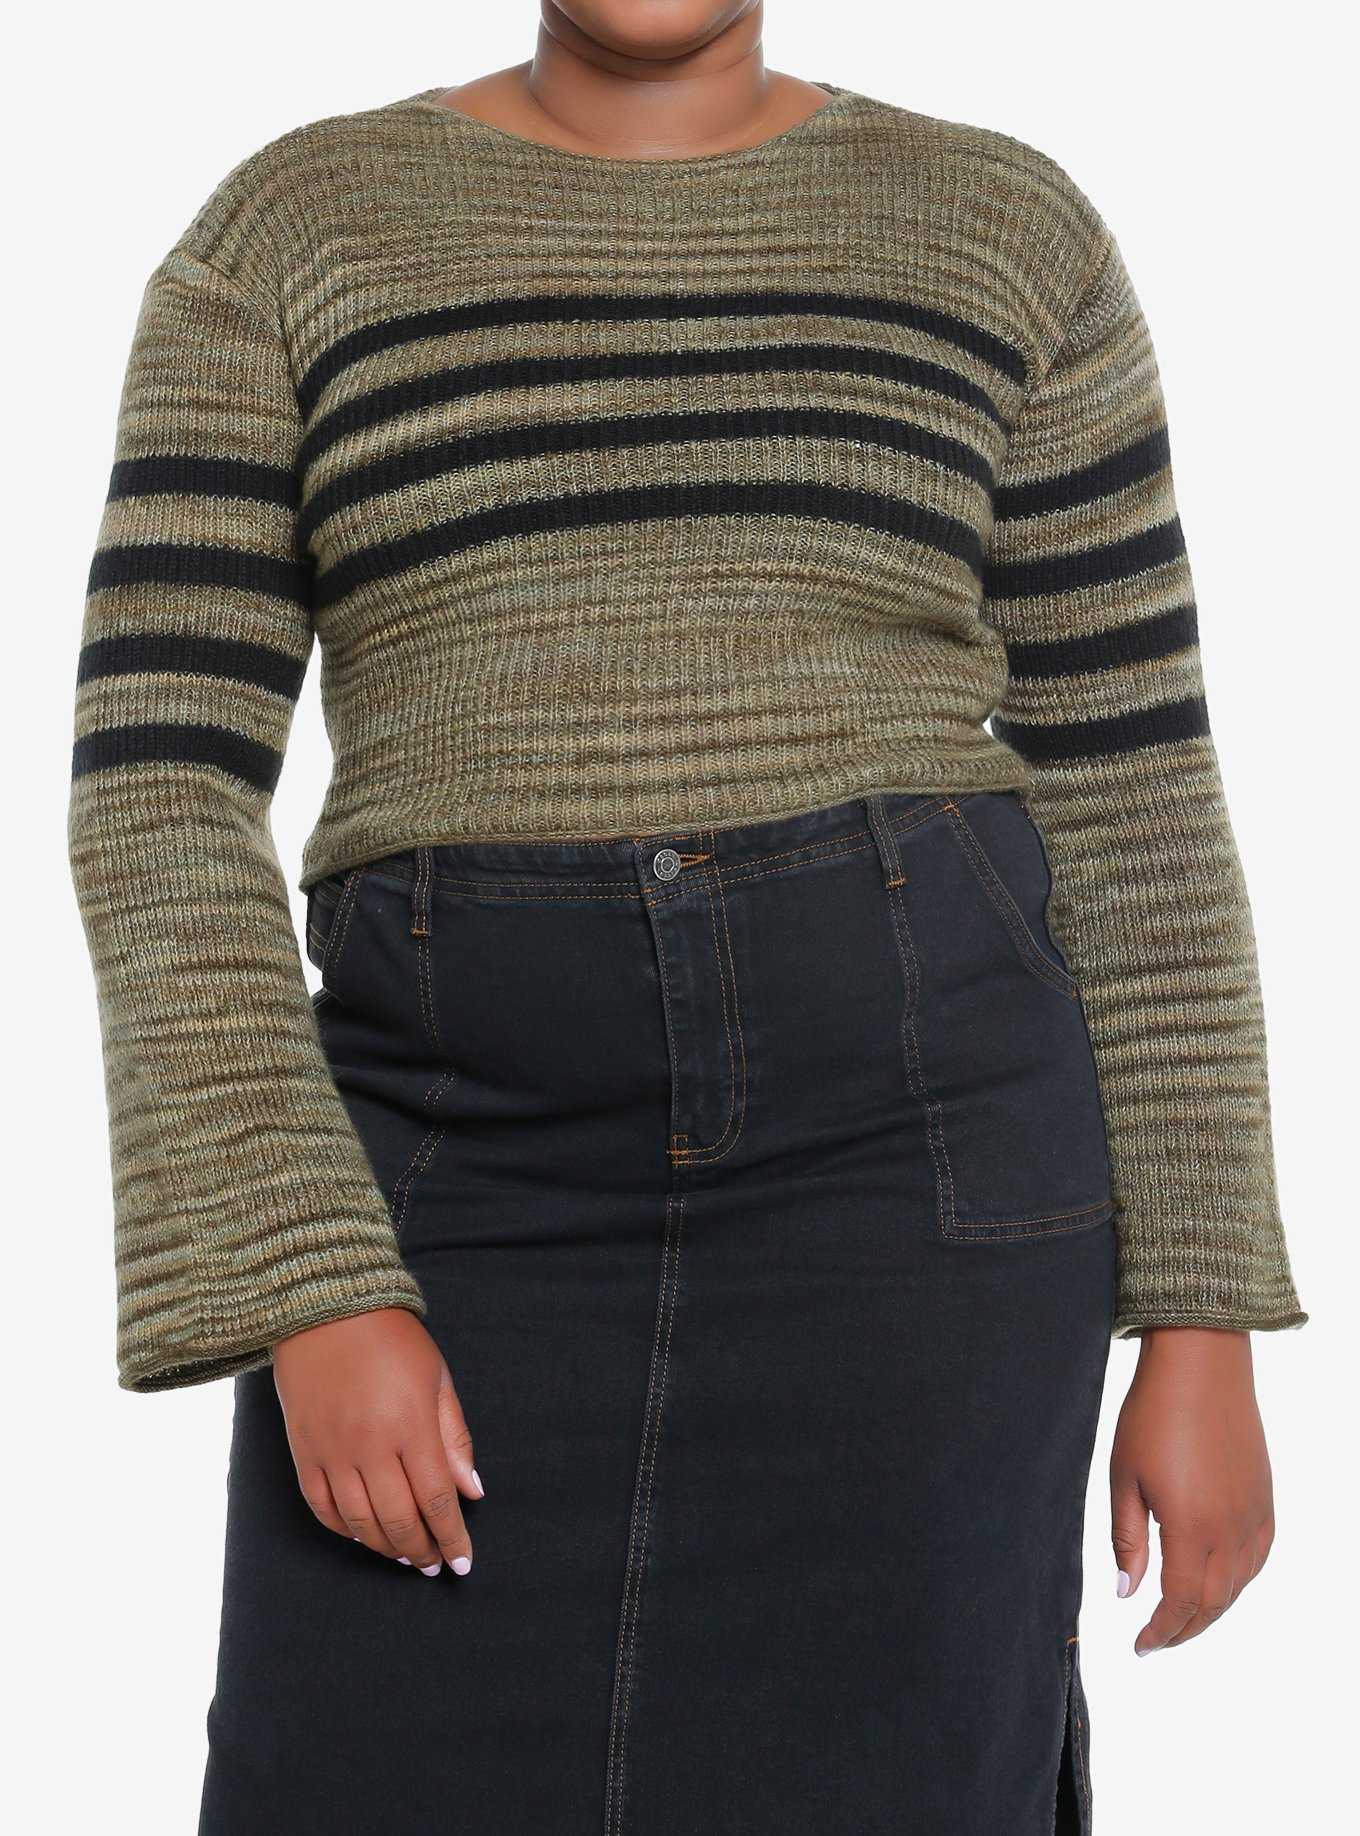 Social Collision Green & Black Stripe Bell Sleeve Sweater Plus Size, , hi-res